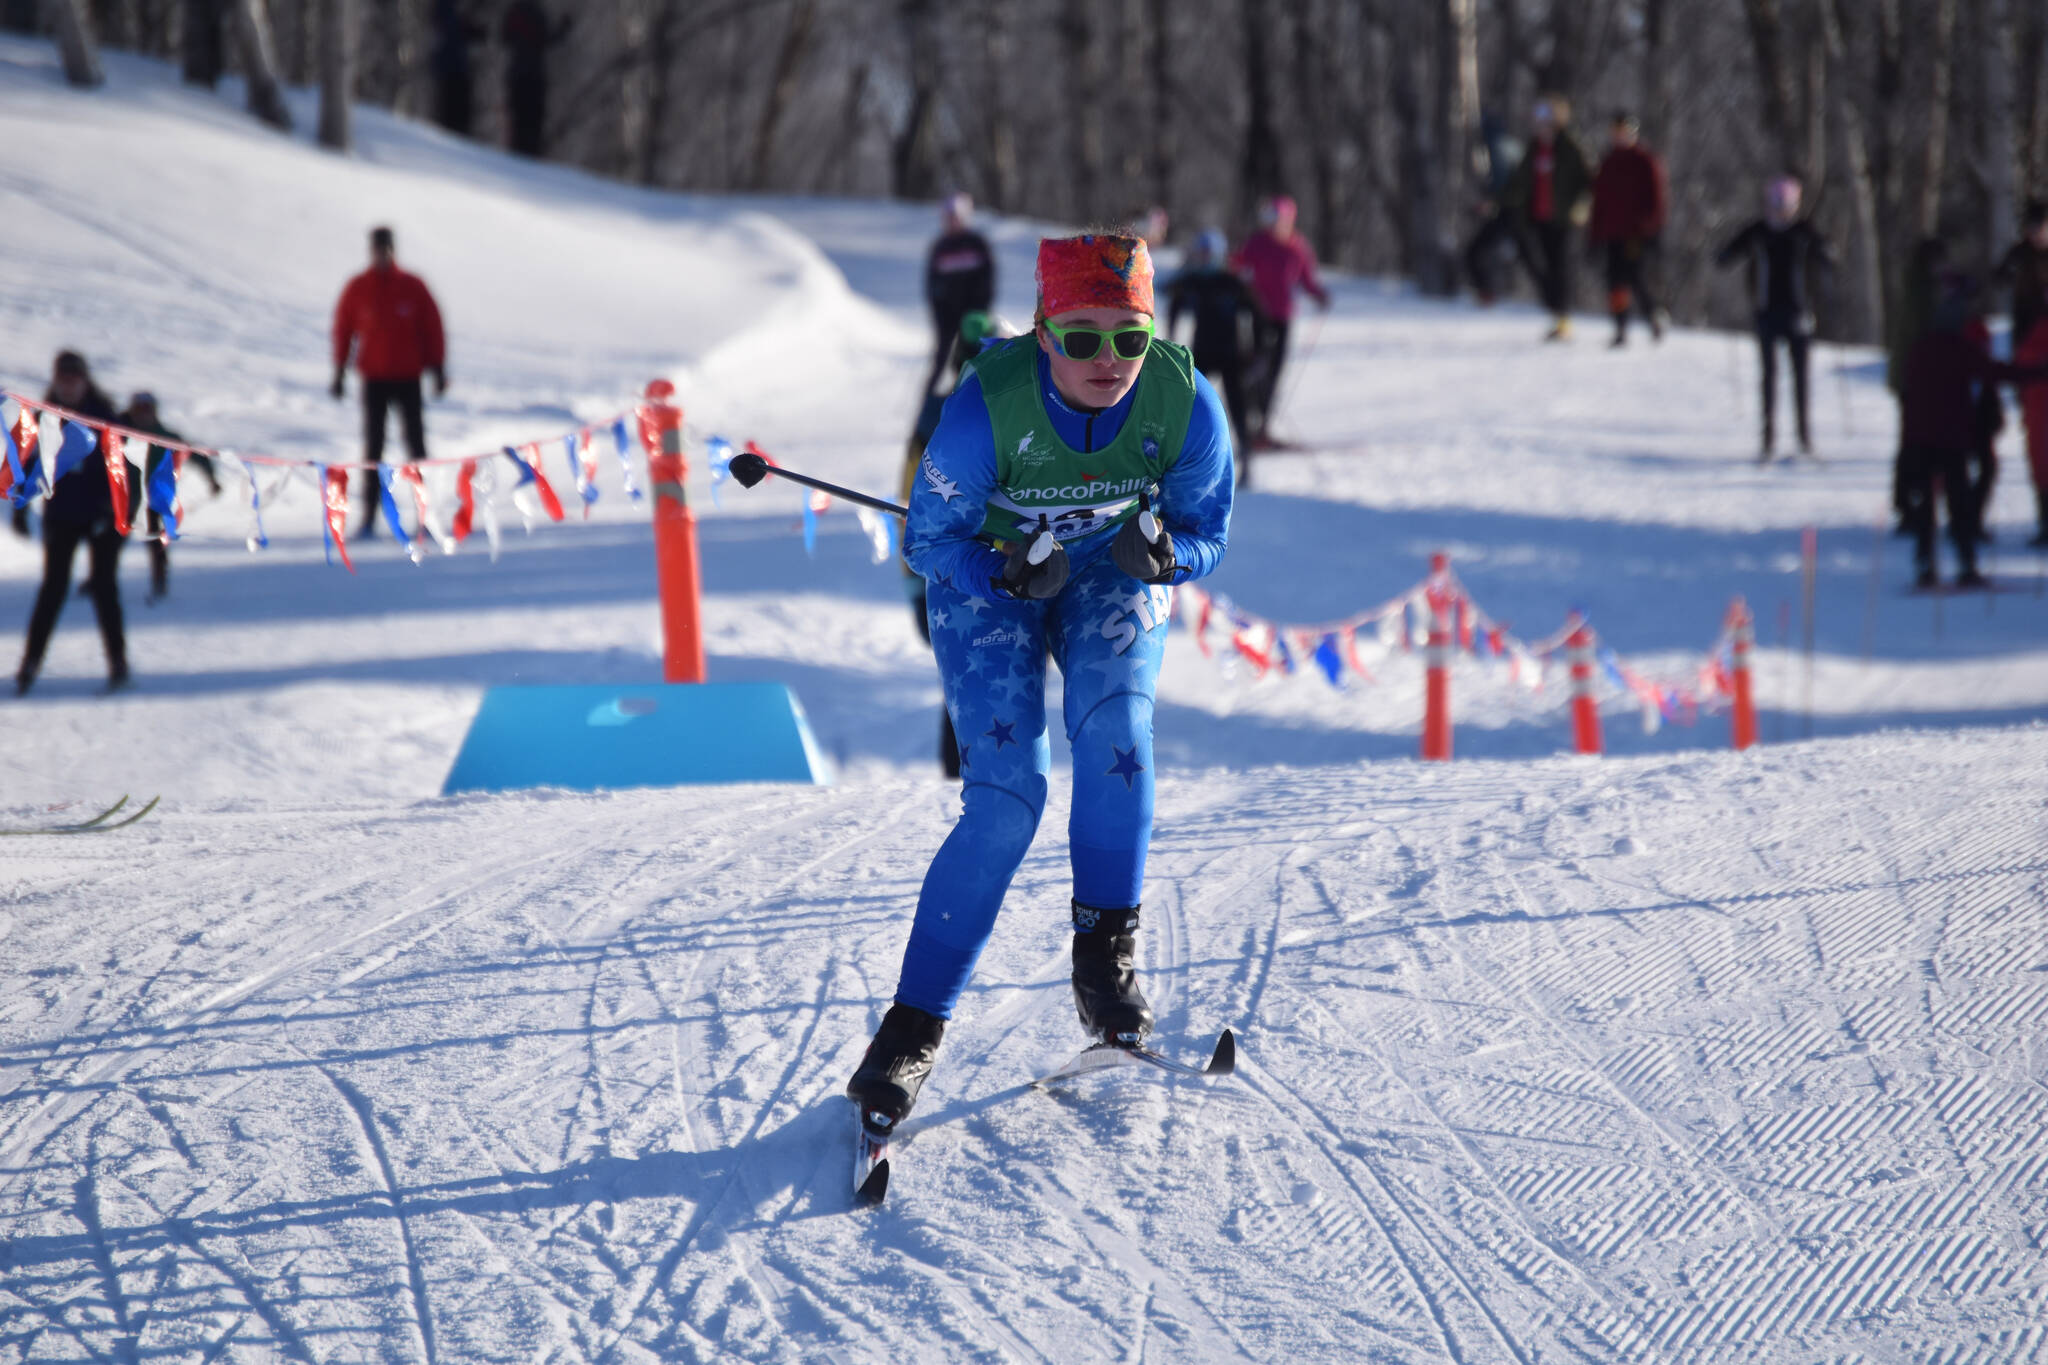 Ariana Cannava, of Soldotna, tucks for a downhill during the girls 4x3.5-kilometer relay at the ASAA State Nordic Ski Championships at Kincaid Park in Anchorage, Alaska, on Saturday, Feb. 25, 2023. (Jake Dye/Peninsula Clarion)